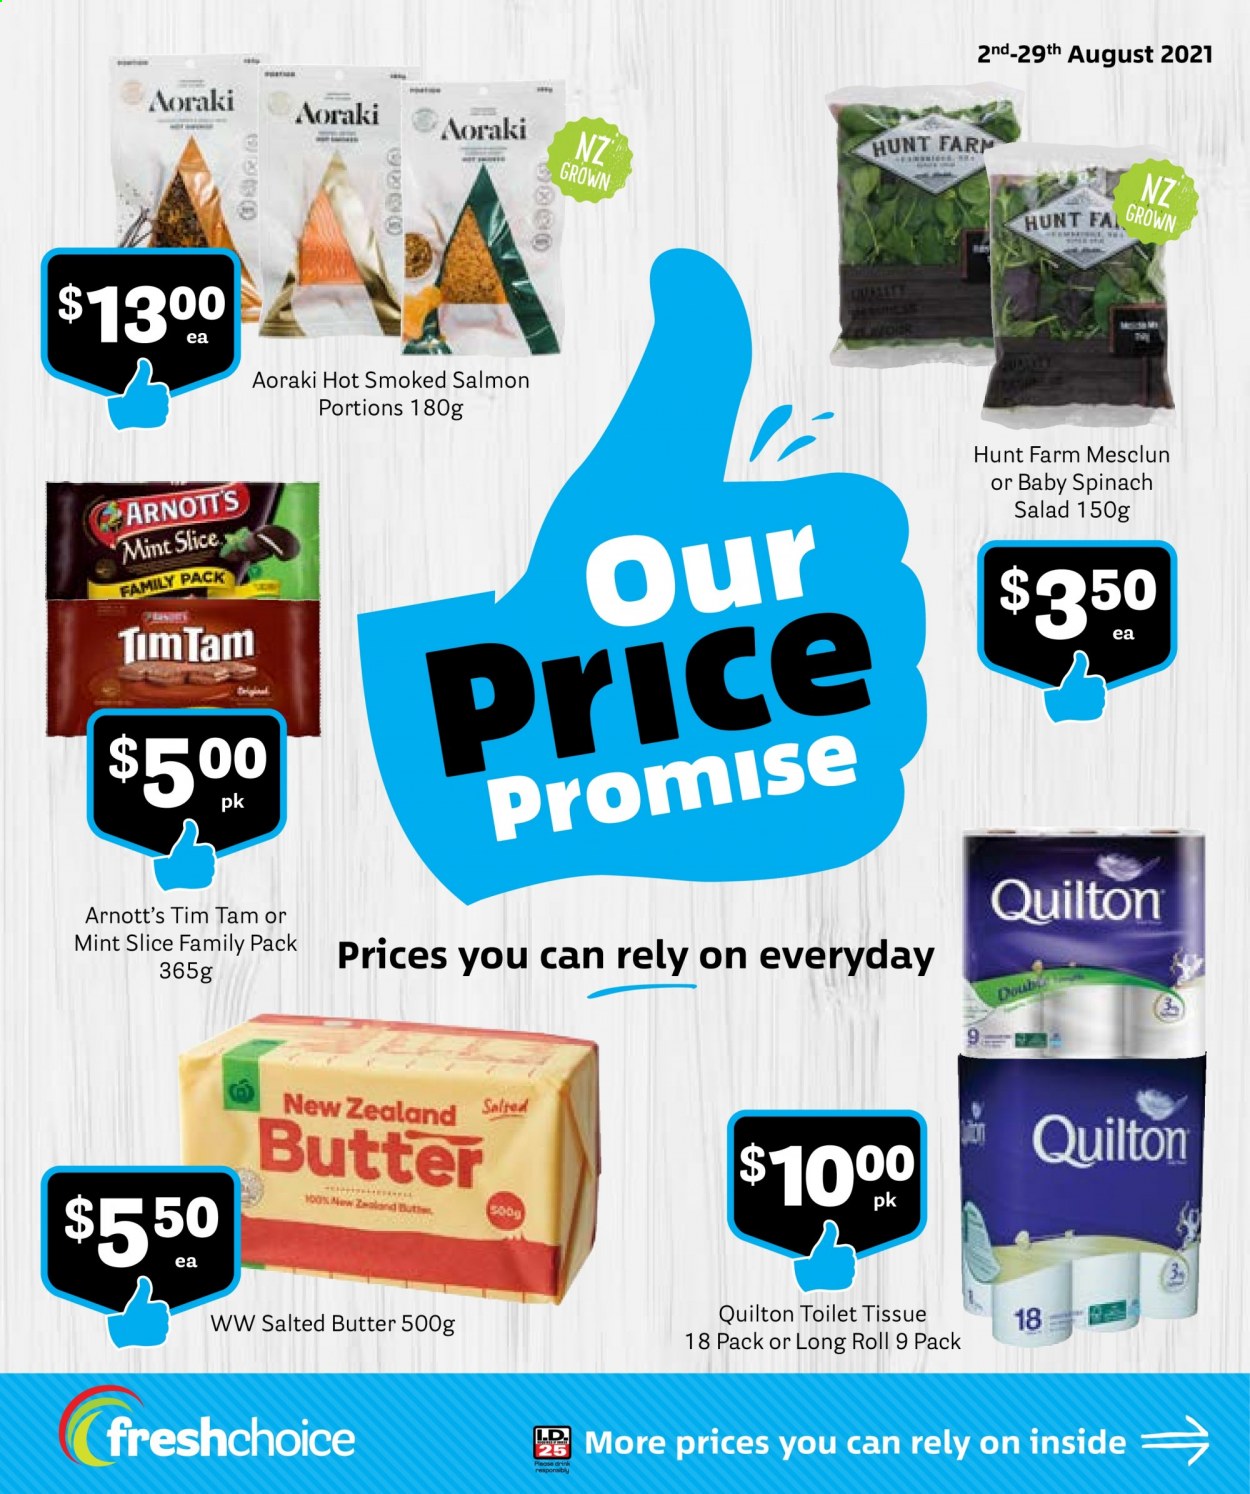 thumbnail - Fresh Choice mailer - 02.08.2021 - 29.08.2021 - Sales products - salad, mesclun, salmon, smoked salmon, butter, salted butter, Tim Tam, toilet paper, Quilton. Page 1.